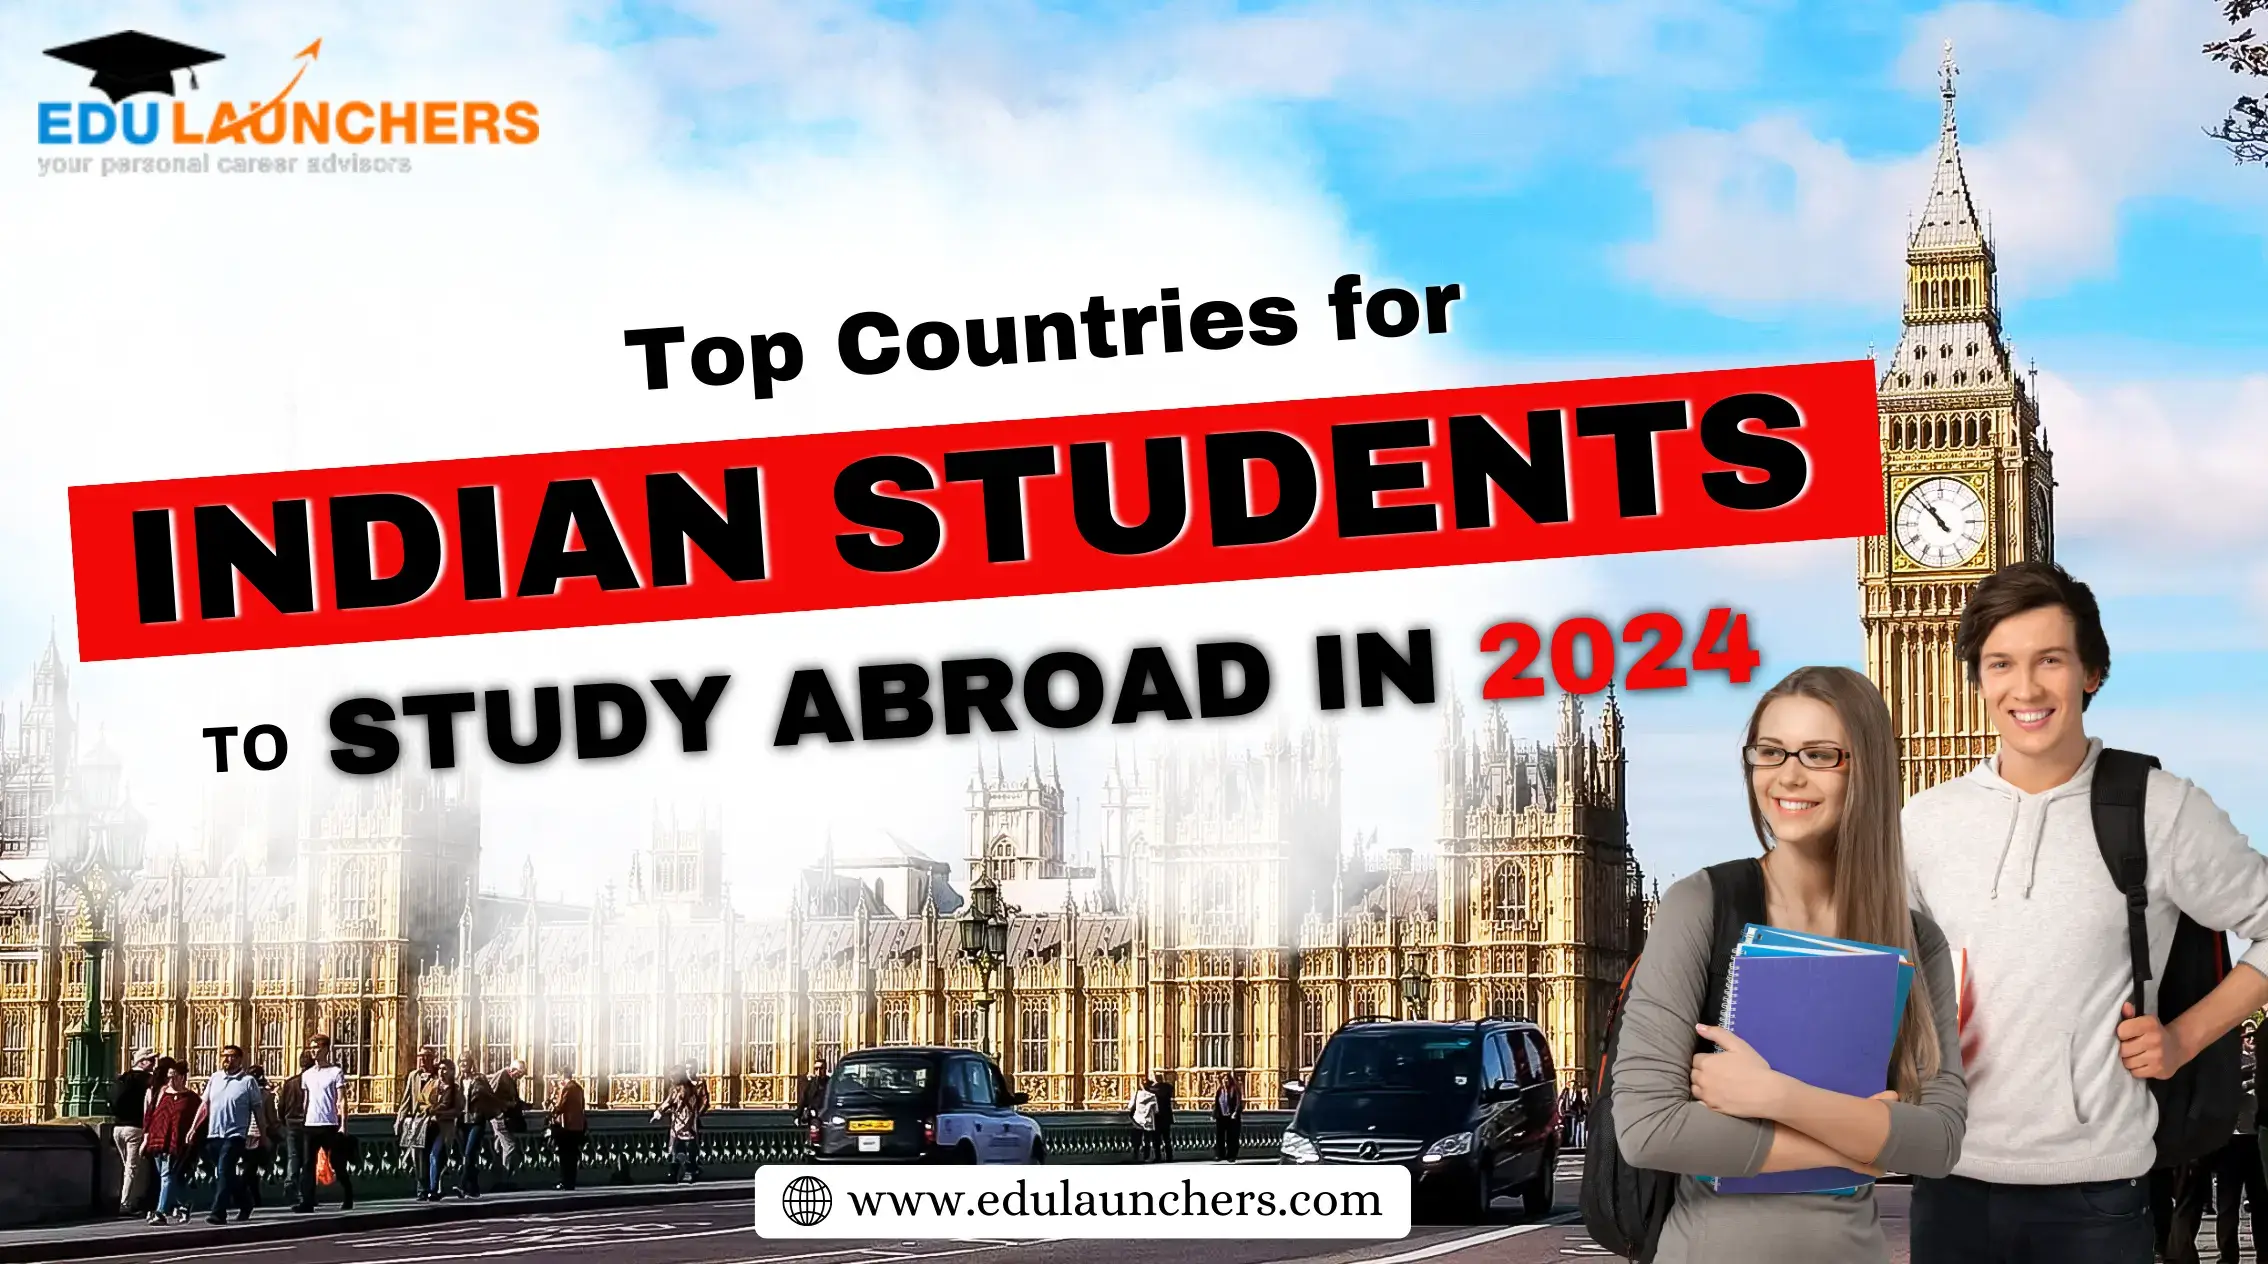 Top Countries For Indian Students To Study Abroad In 2024.webp